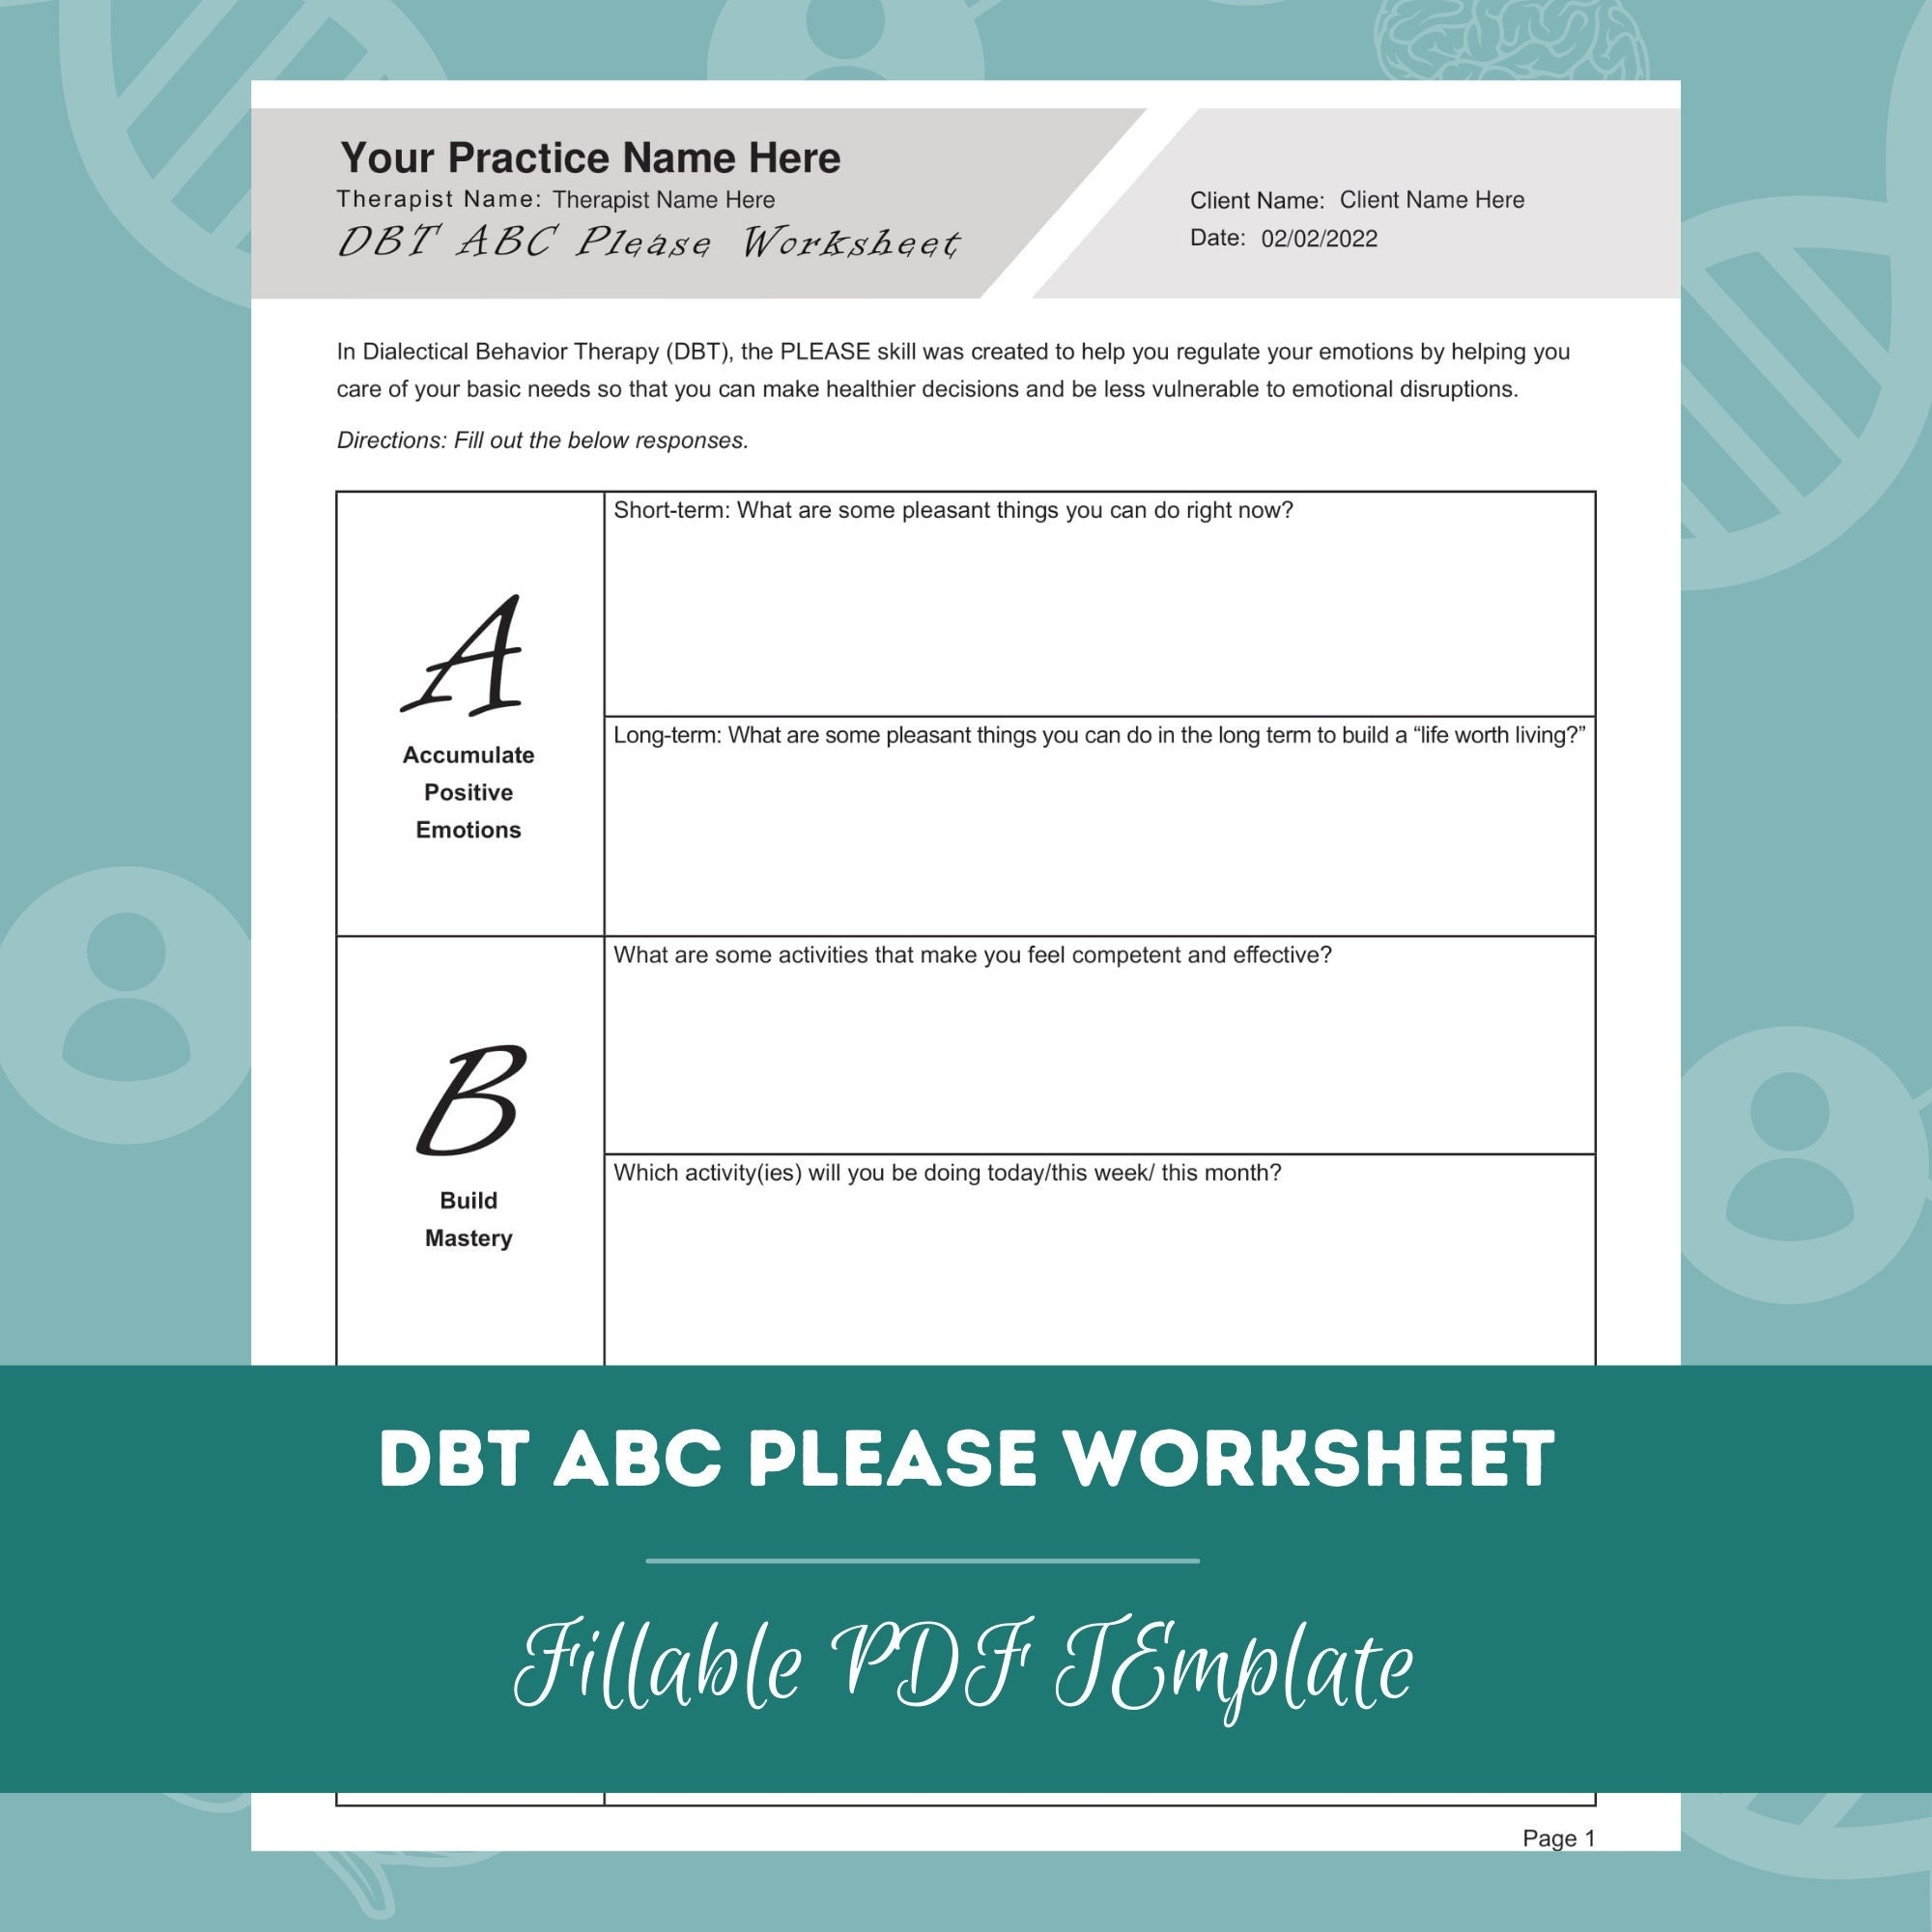 DBT ABC Please Worksheet Editable Fillable PDF Template For Counselors Psychologists Social Workers Therapists Etsy